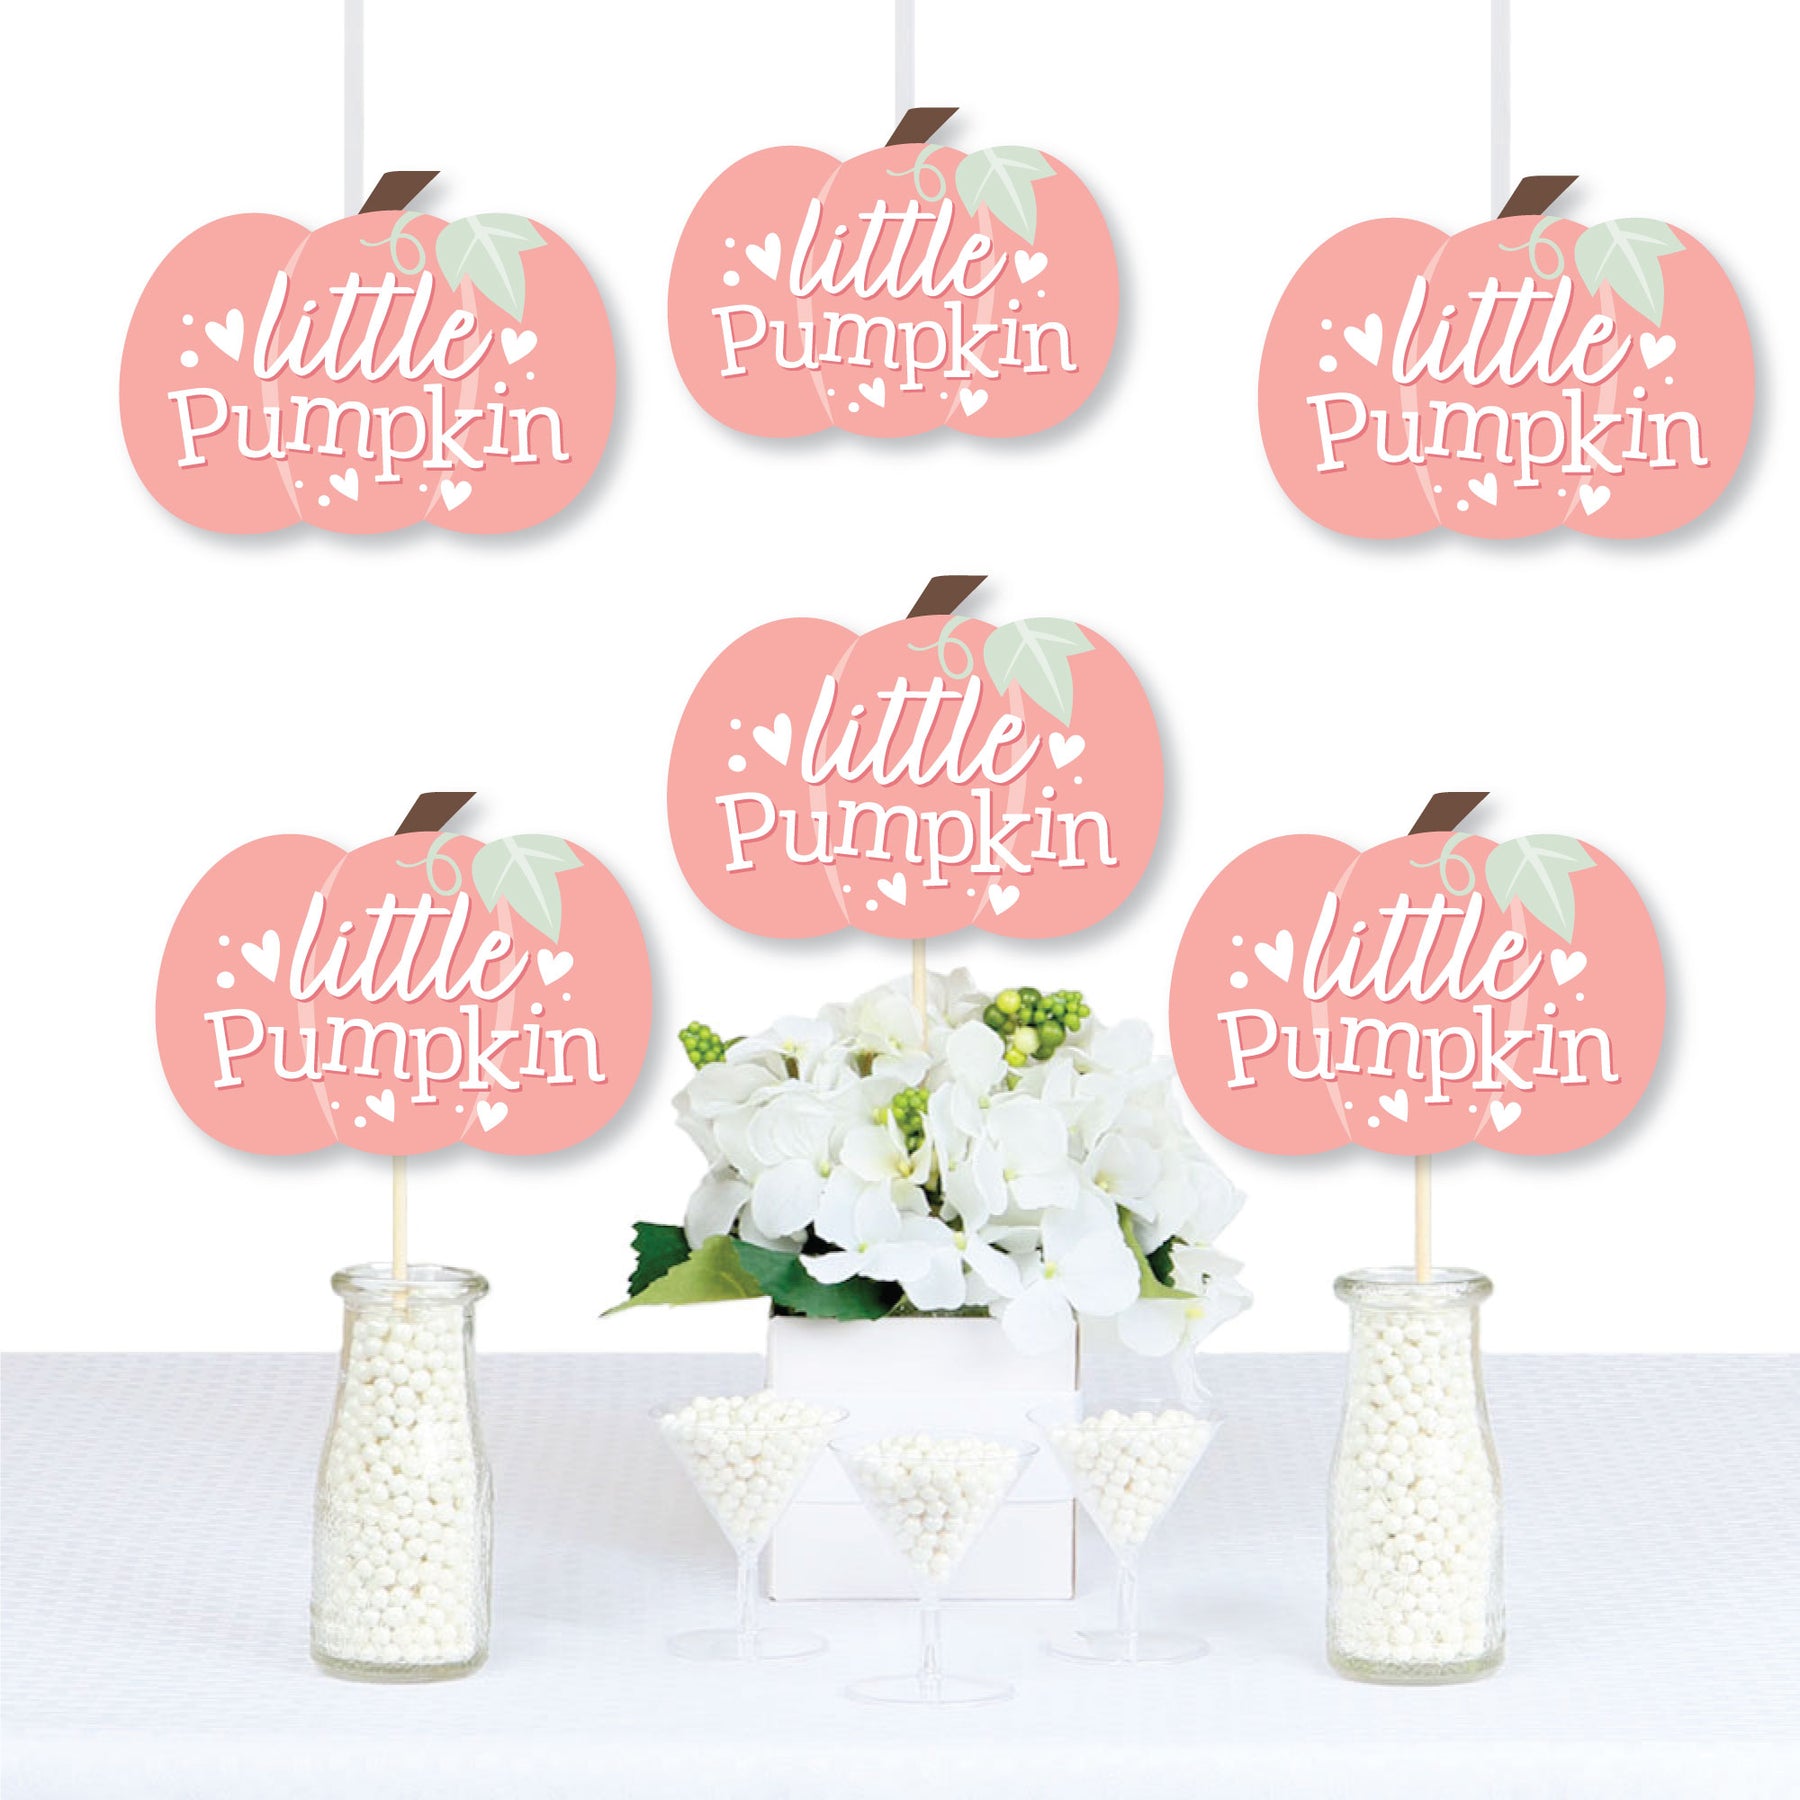 20 Baby Shower Decorations You Can Find on